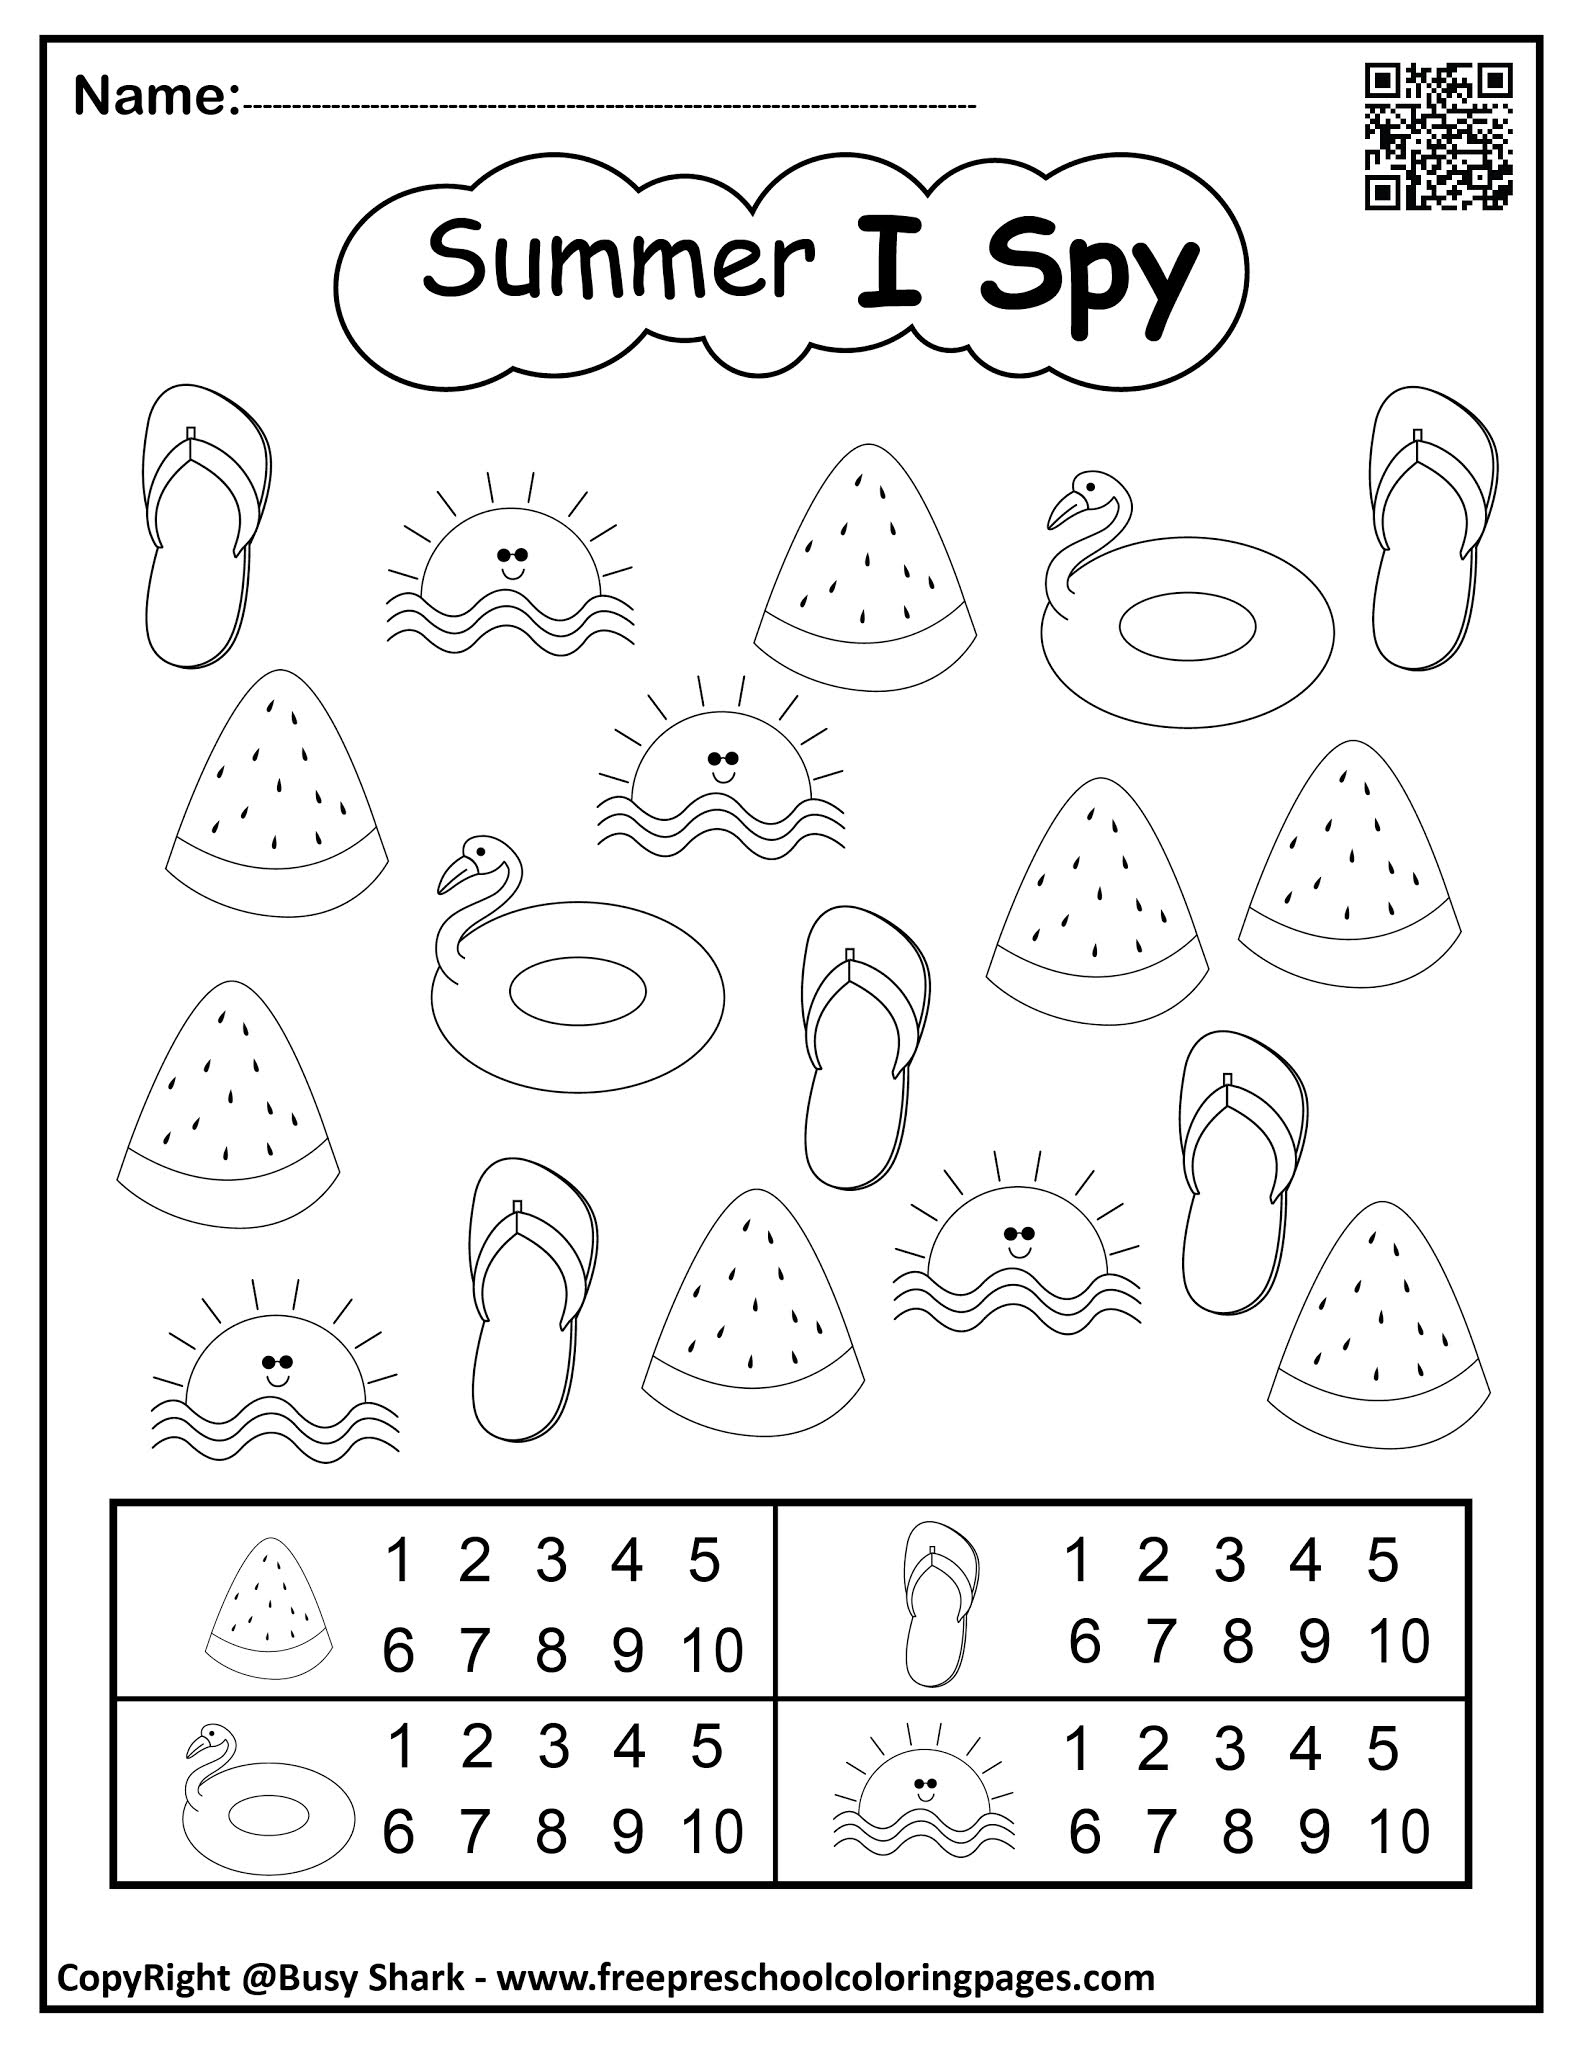 Set of Summer I spy numbers coloring pages